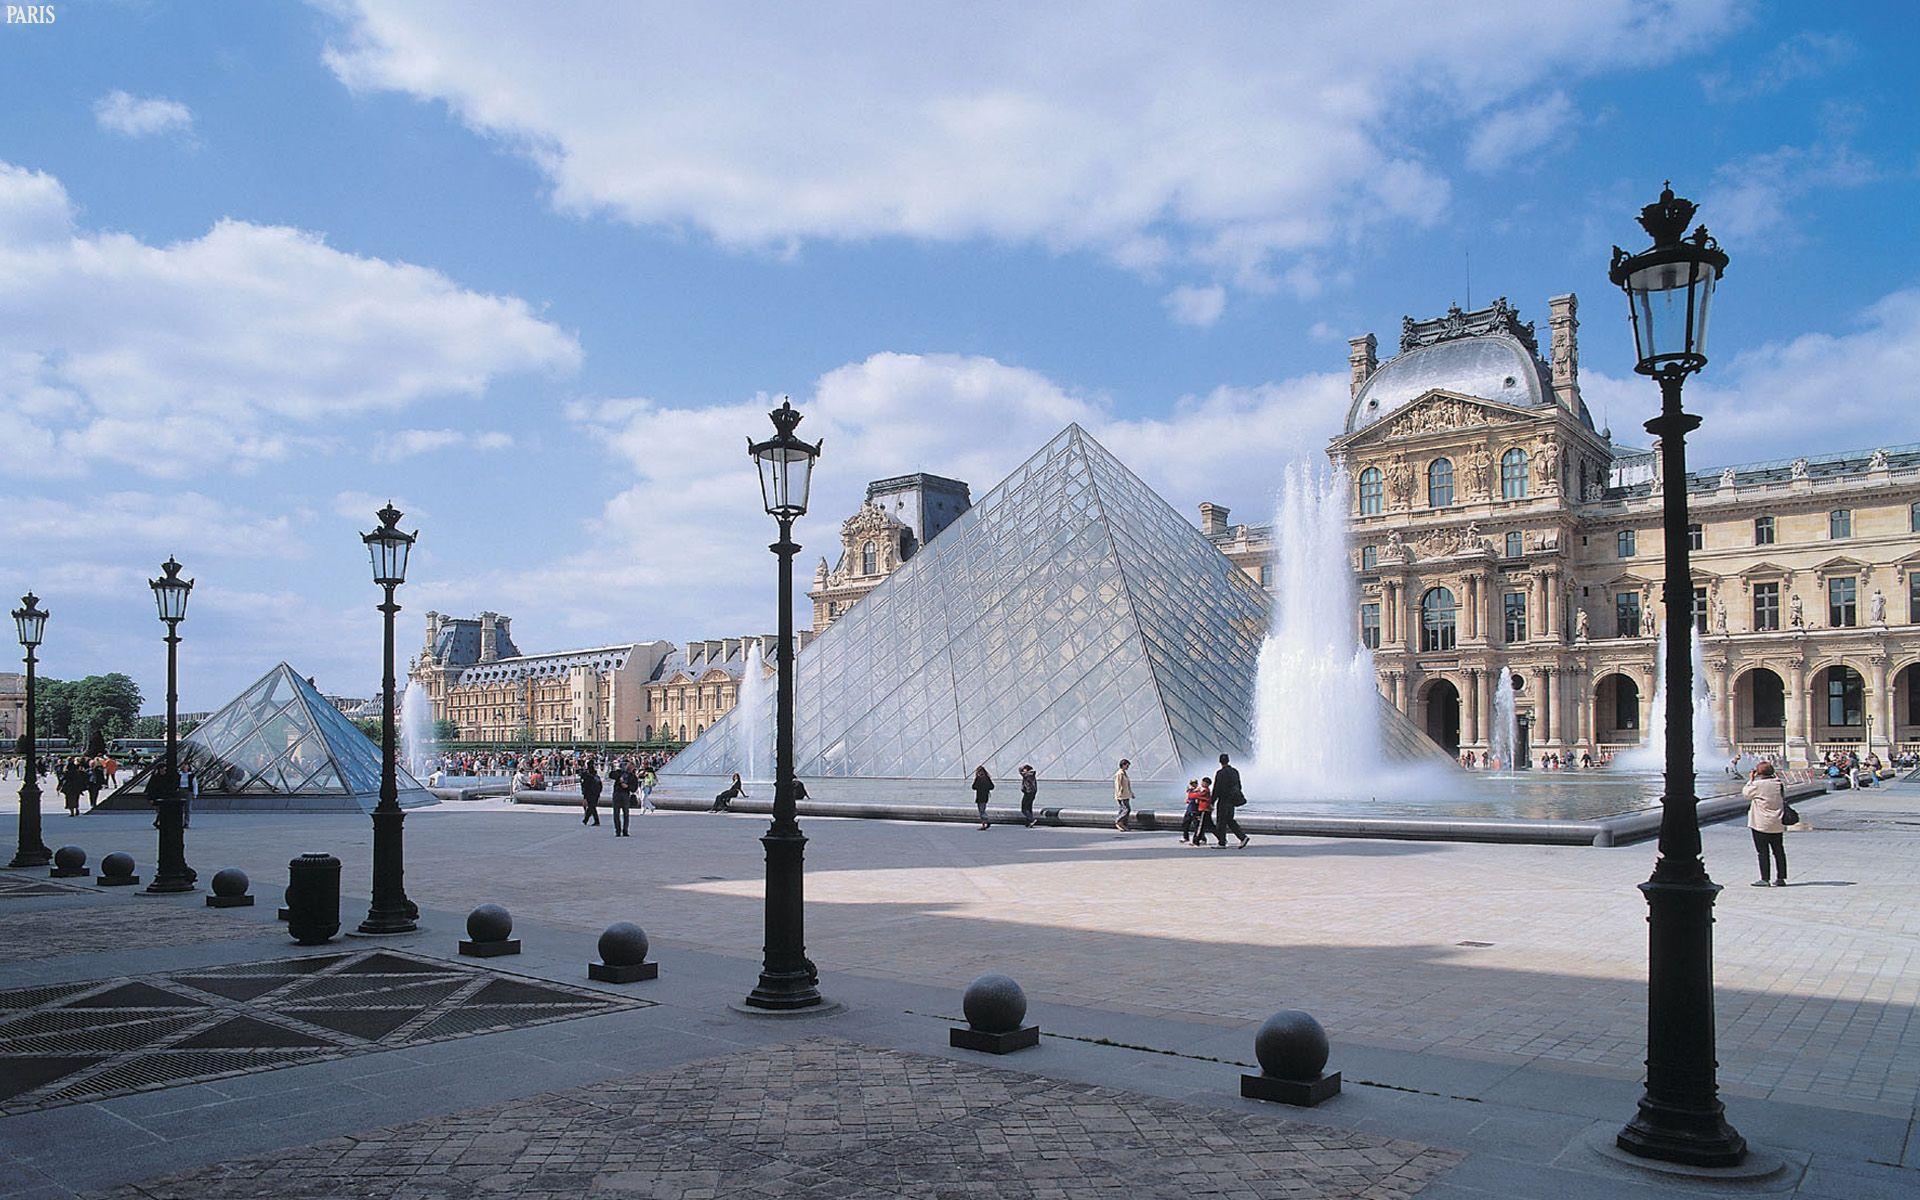 The Louvre Pyramid Tourism Wallpaper